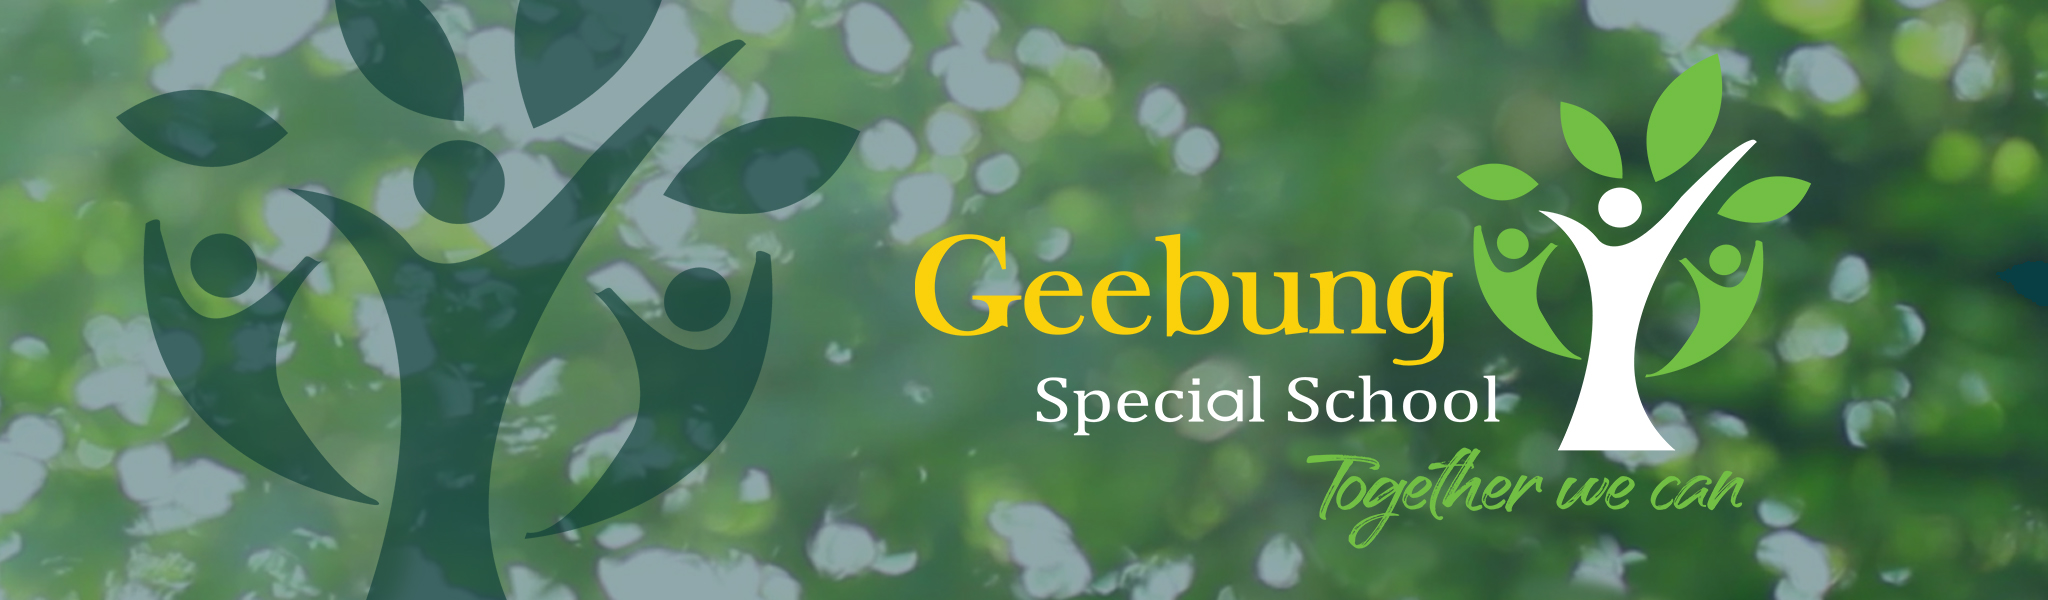 Geebung Special School - Together we can